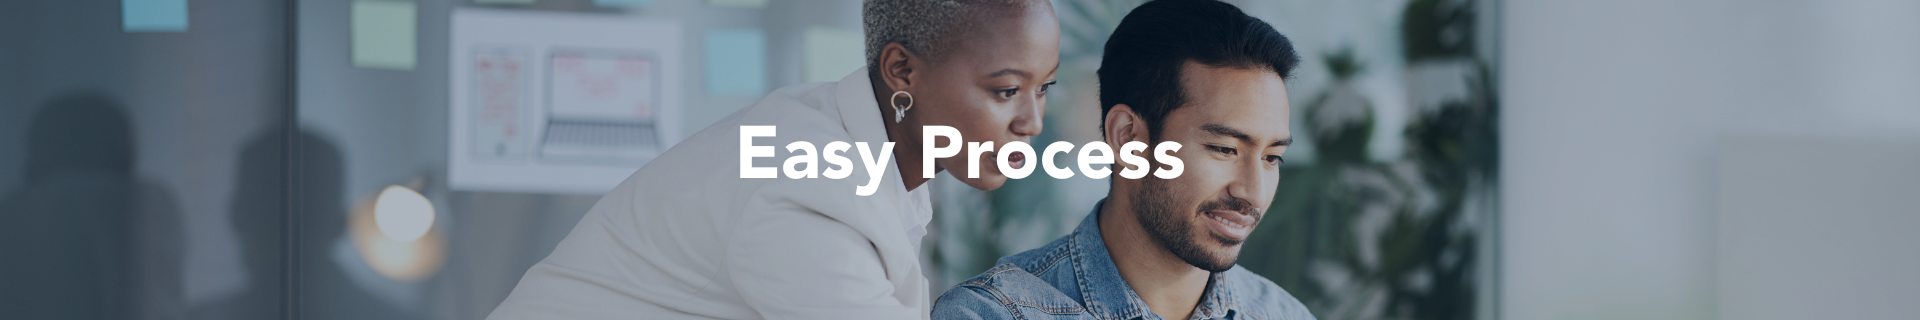 easy process banner